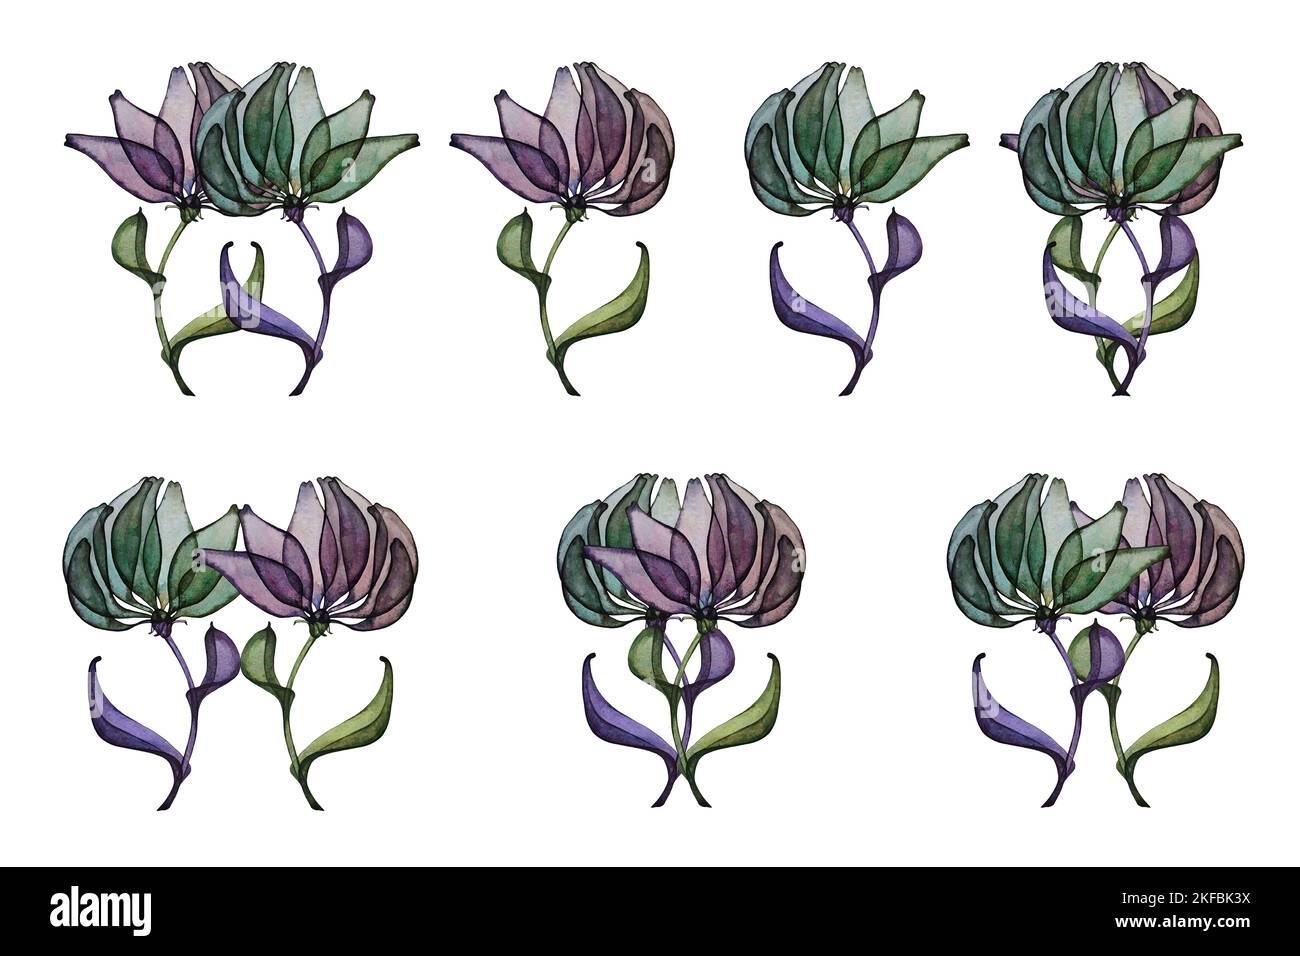 Fantasy hand drawn watercolor purple and green flowers for weddings, birthdays, Halloween, invitations, cards. Elements isolated on white BG Stock Photo